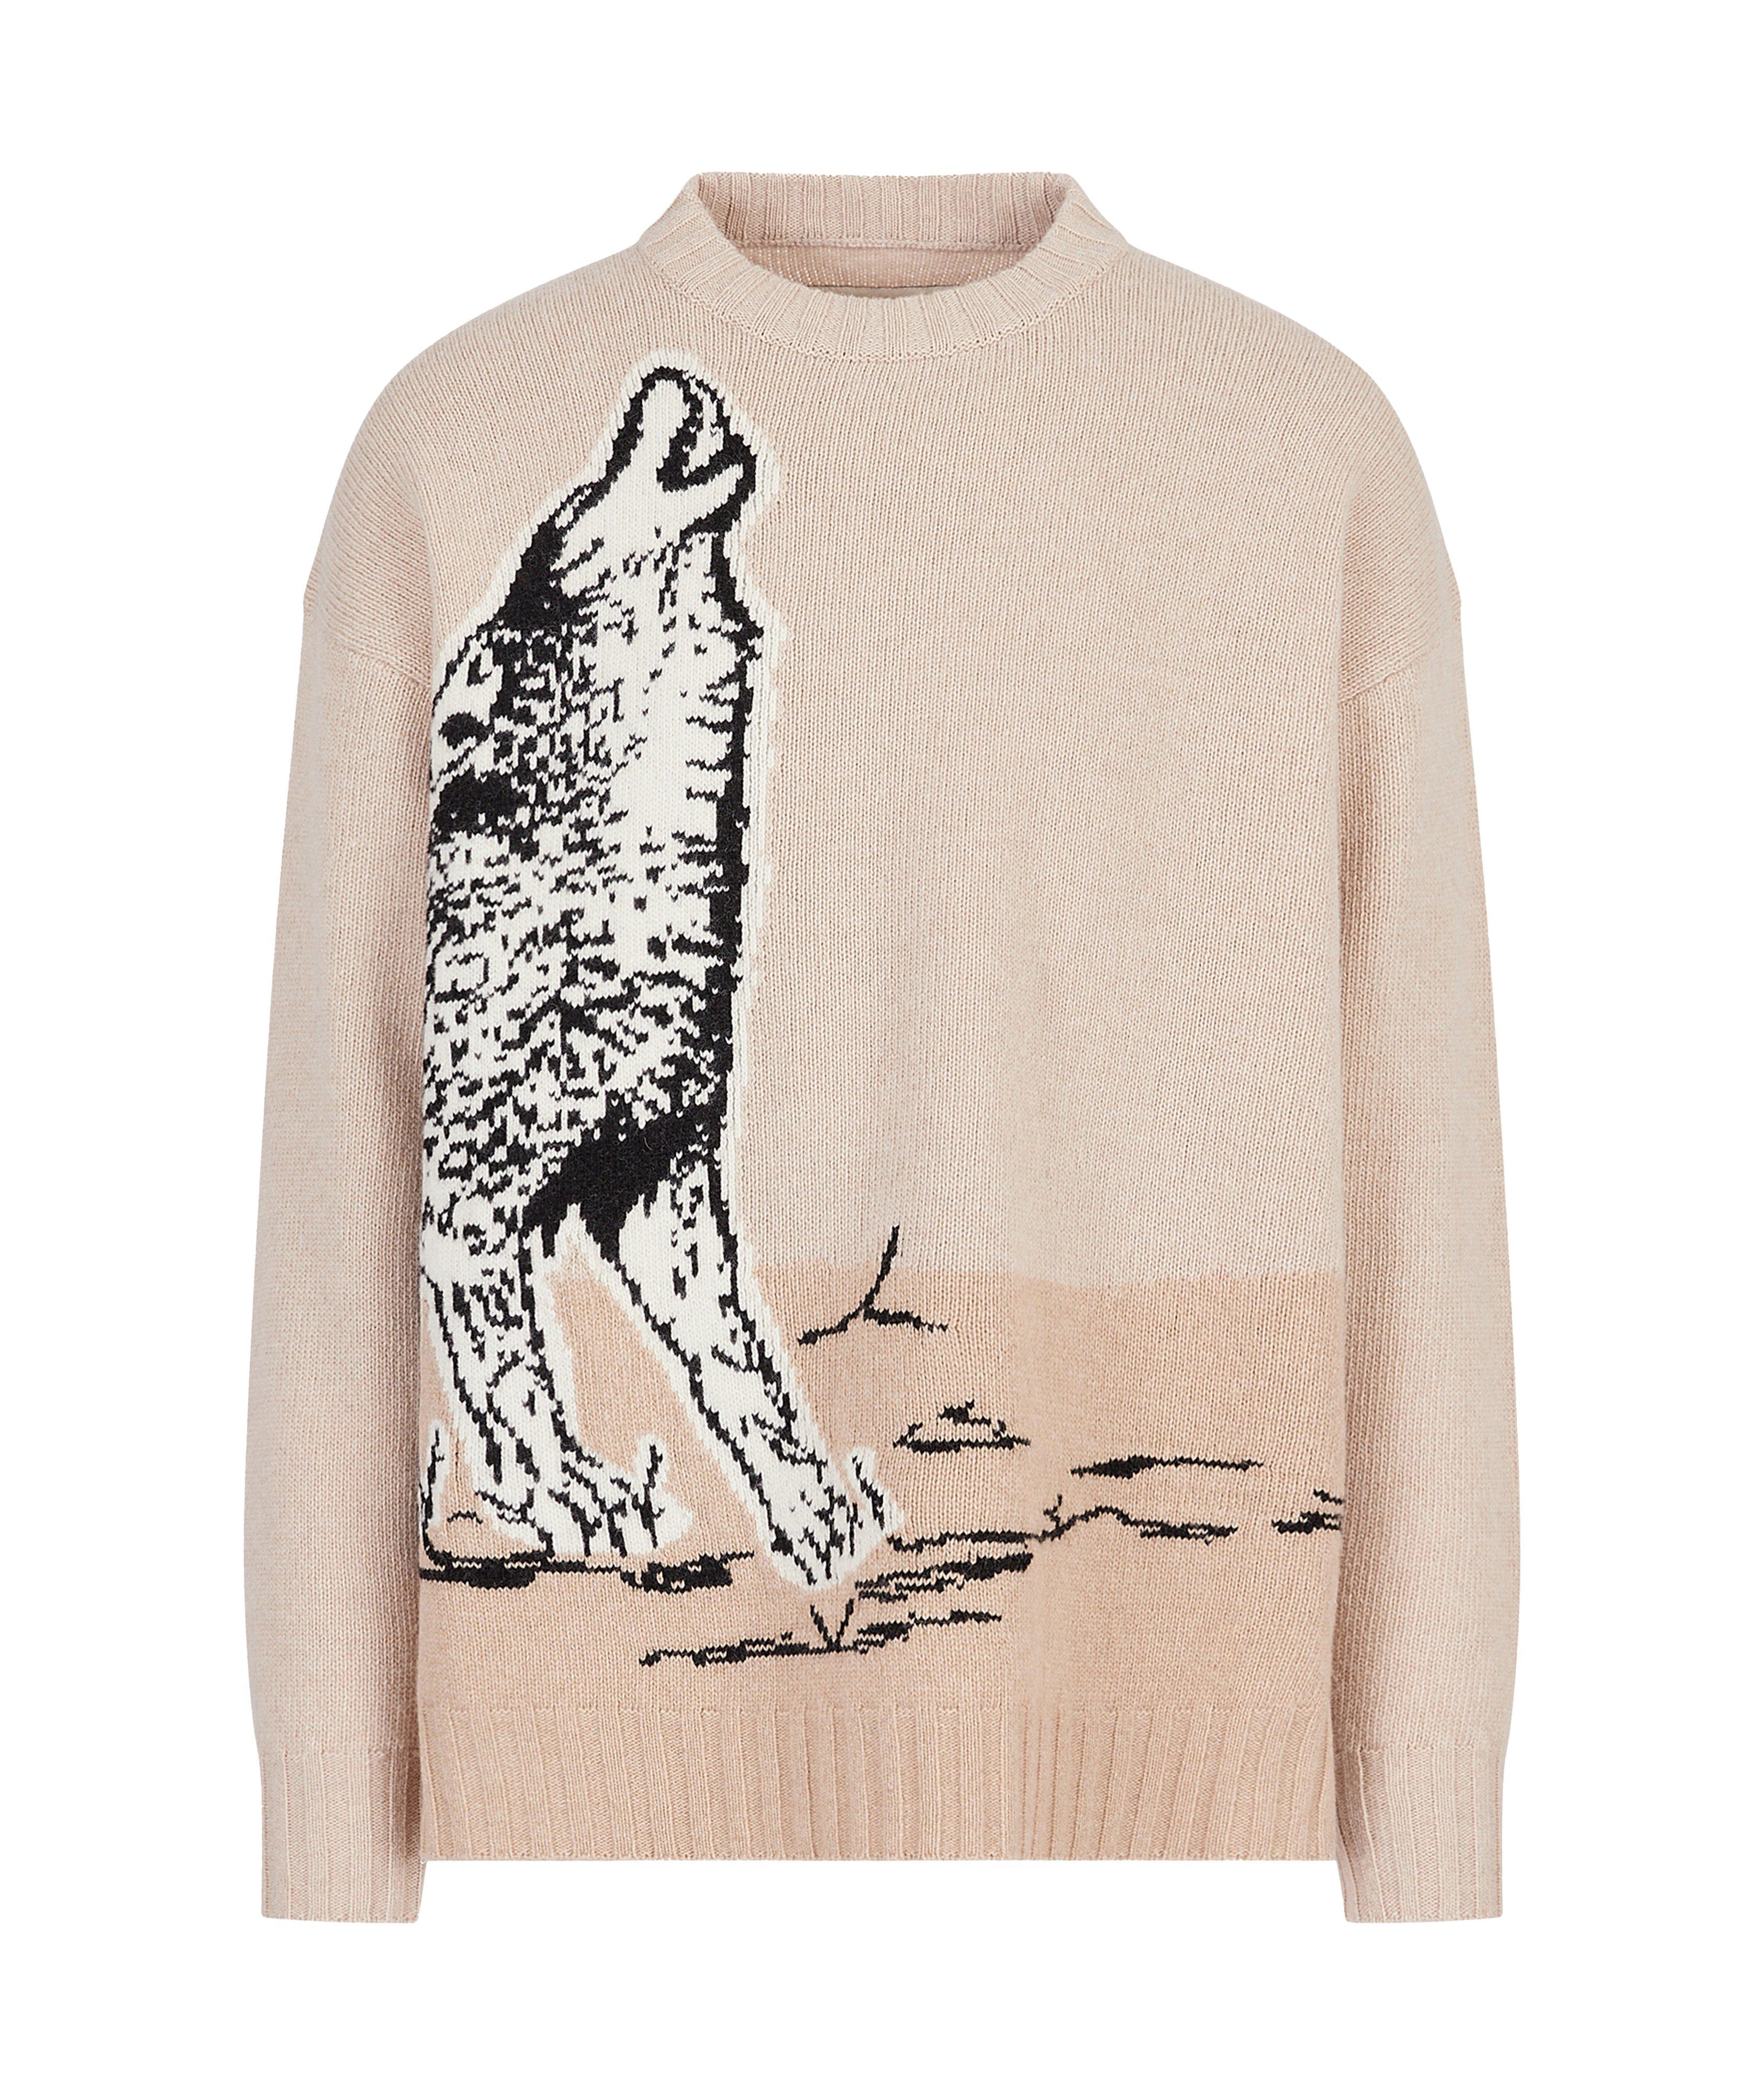 EArctic Sustainable Collection Intarsia Animal Sweater image 0